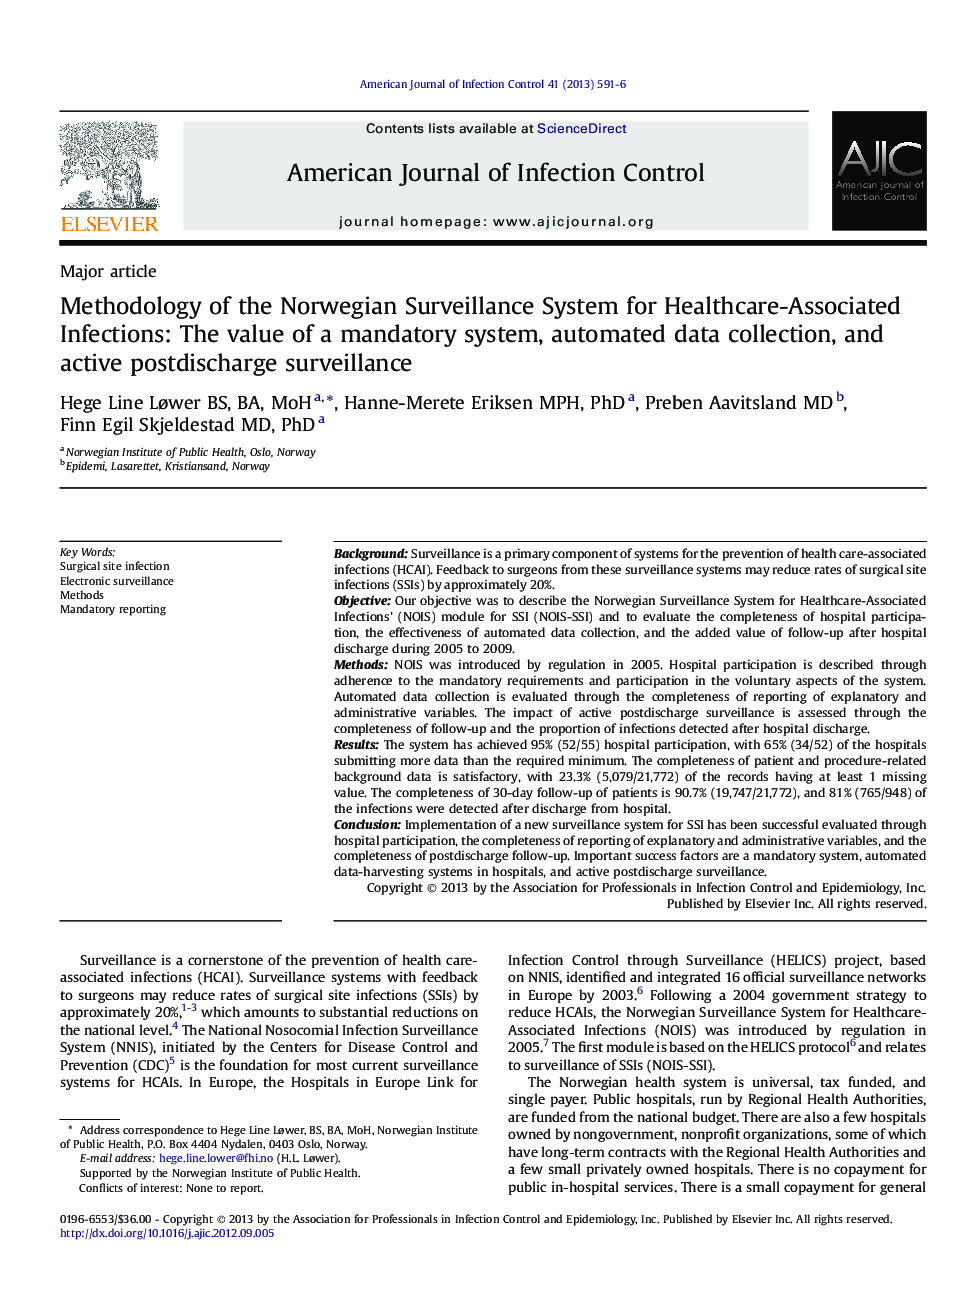 Methodology of the Norwegian Surveillance System for Healthcare-Associated Infections: The value of a mandatory system, automated data collection, and active postdischarge surveillance 